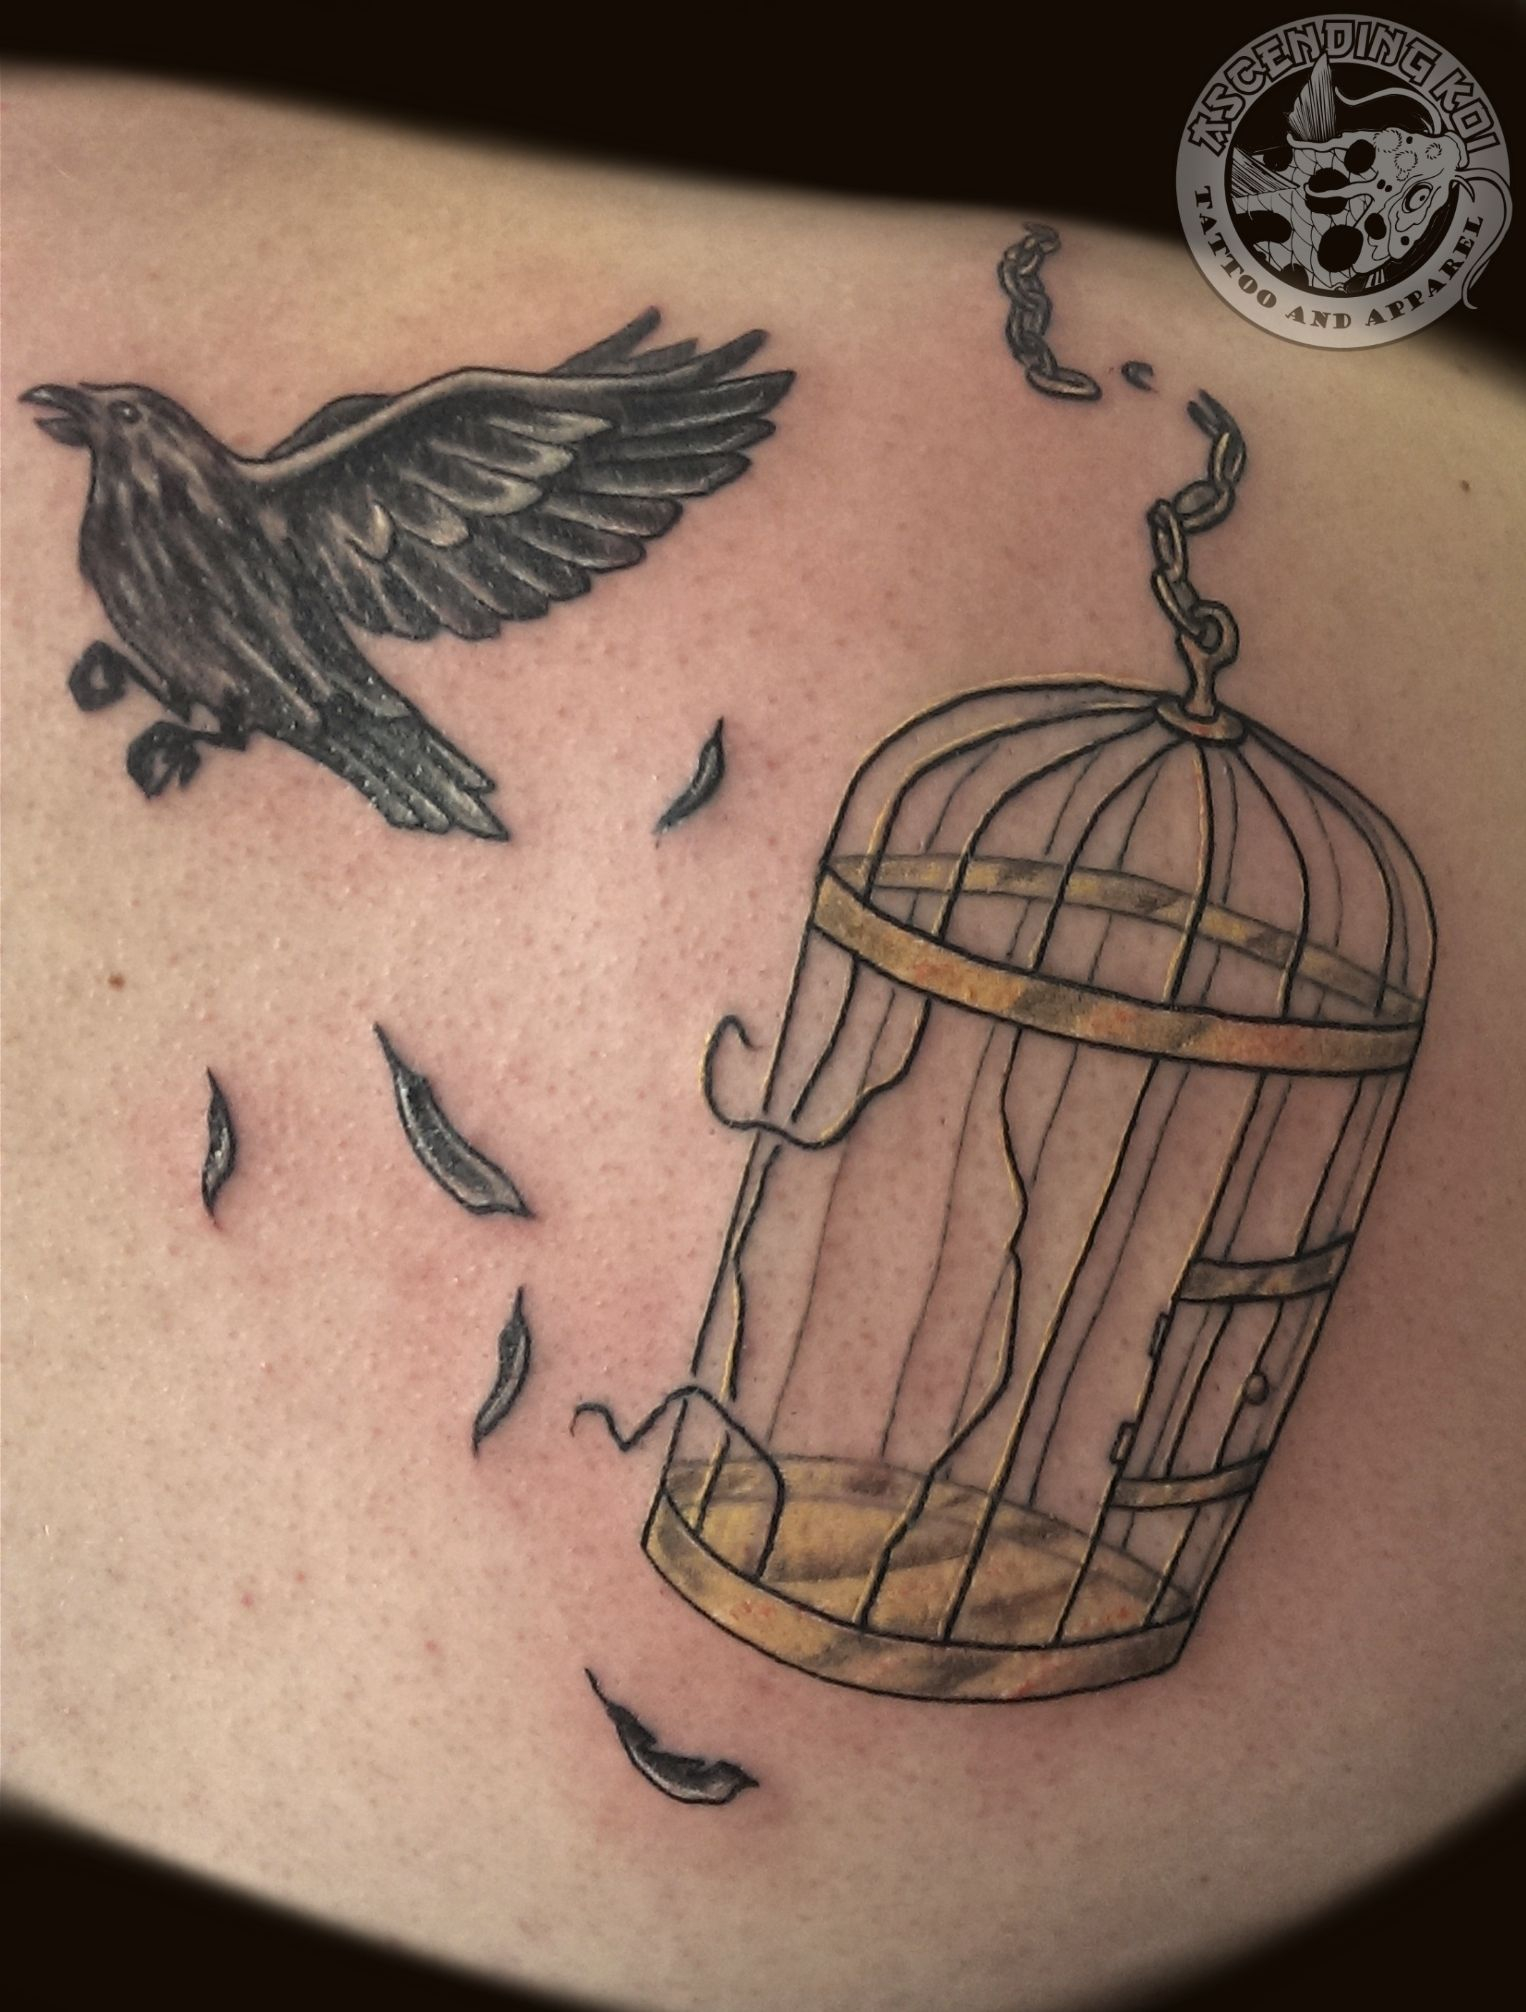 The Idea Of The Bird Breaking Free And The Cage Actually Looking intended for sizing 1526 X 2012